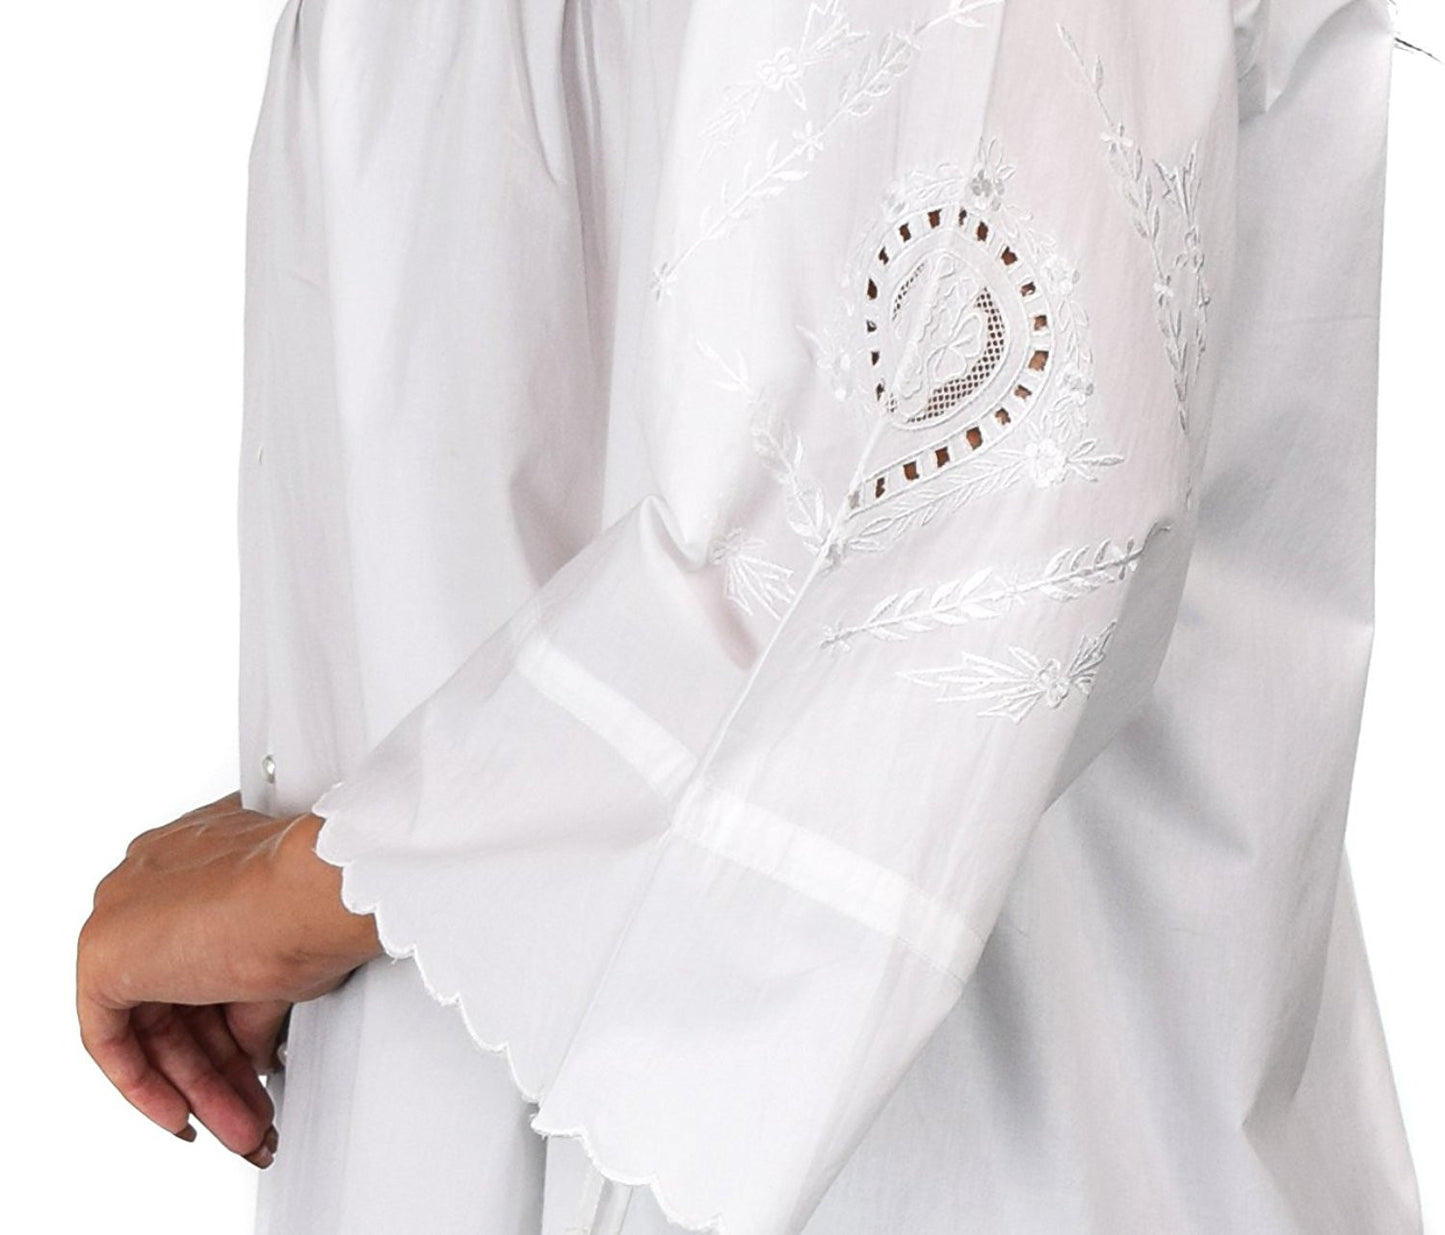 Embroidered Shirt, Plus Size Shirt, Oversized Button Down Dress Shirt, Embroidered Blouse